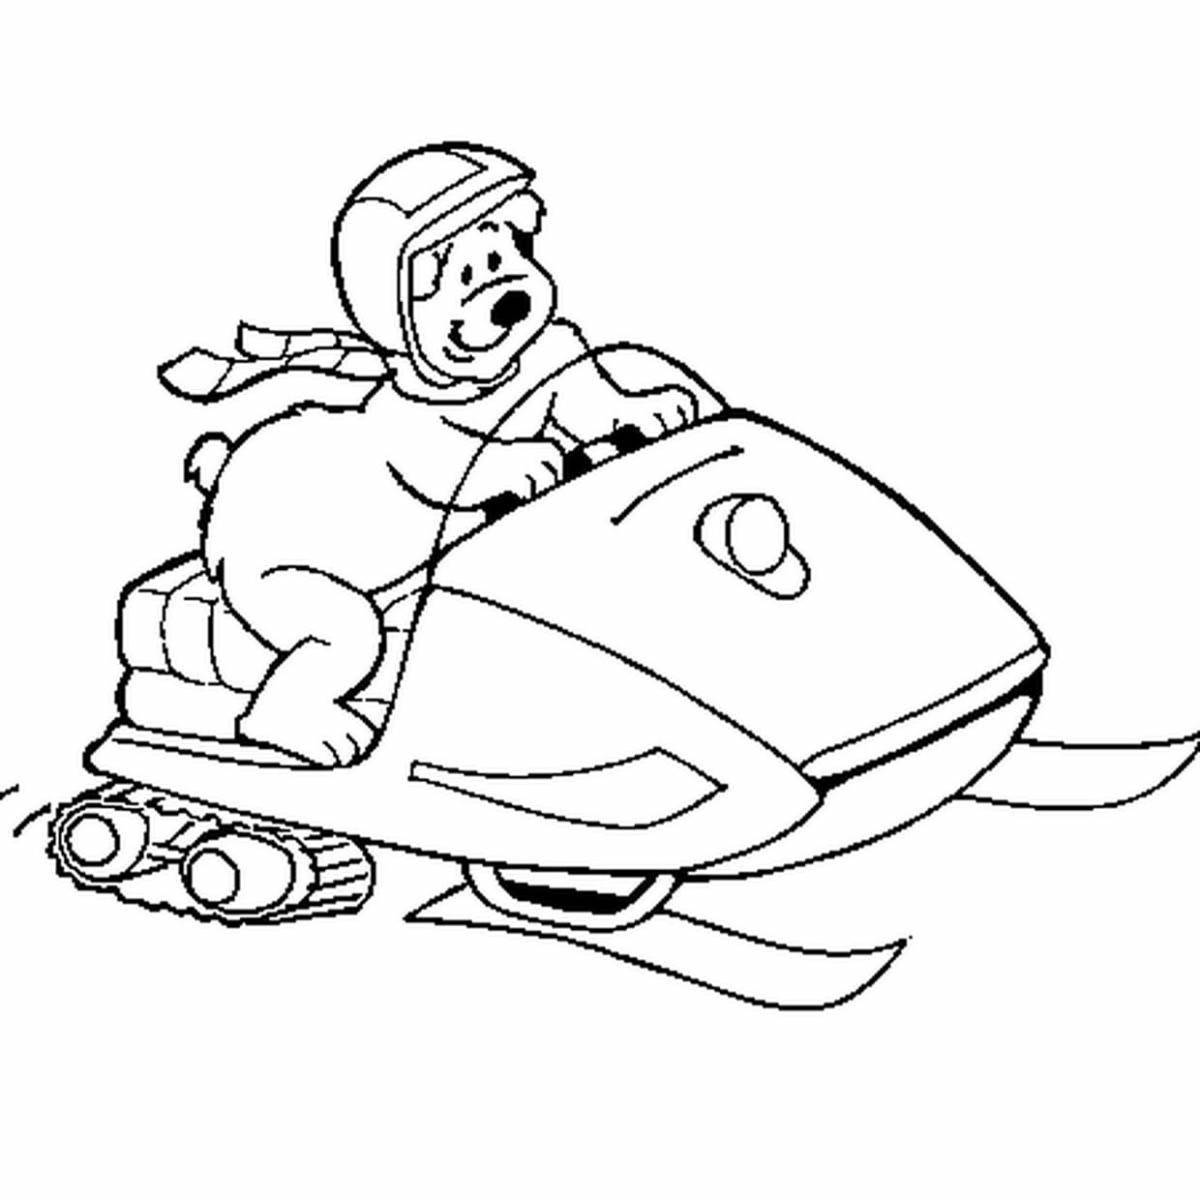 Snowstorm with elevated snowmobile coloring page